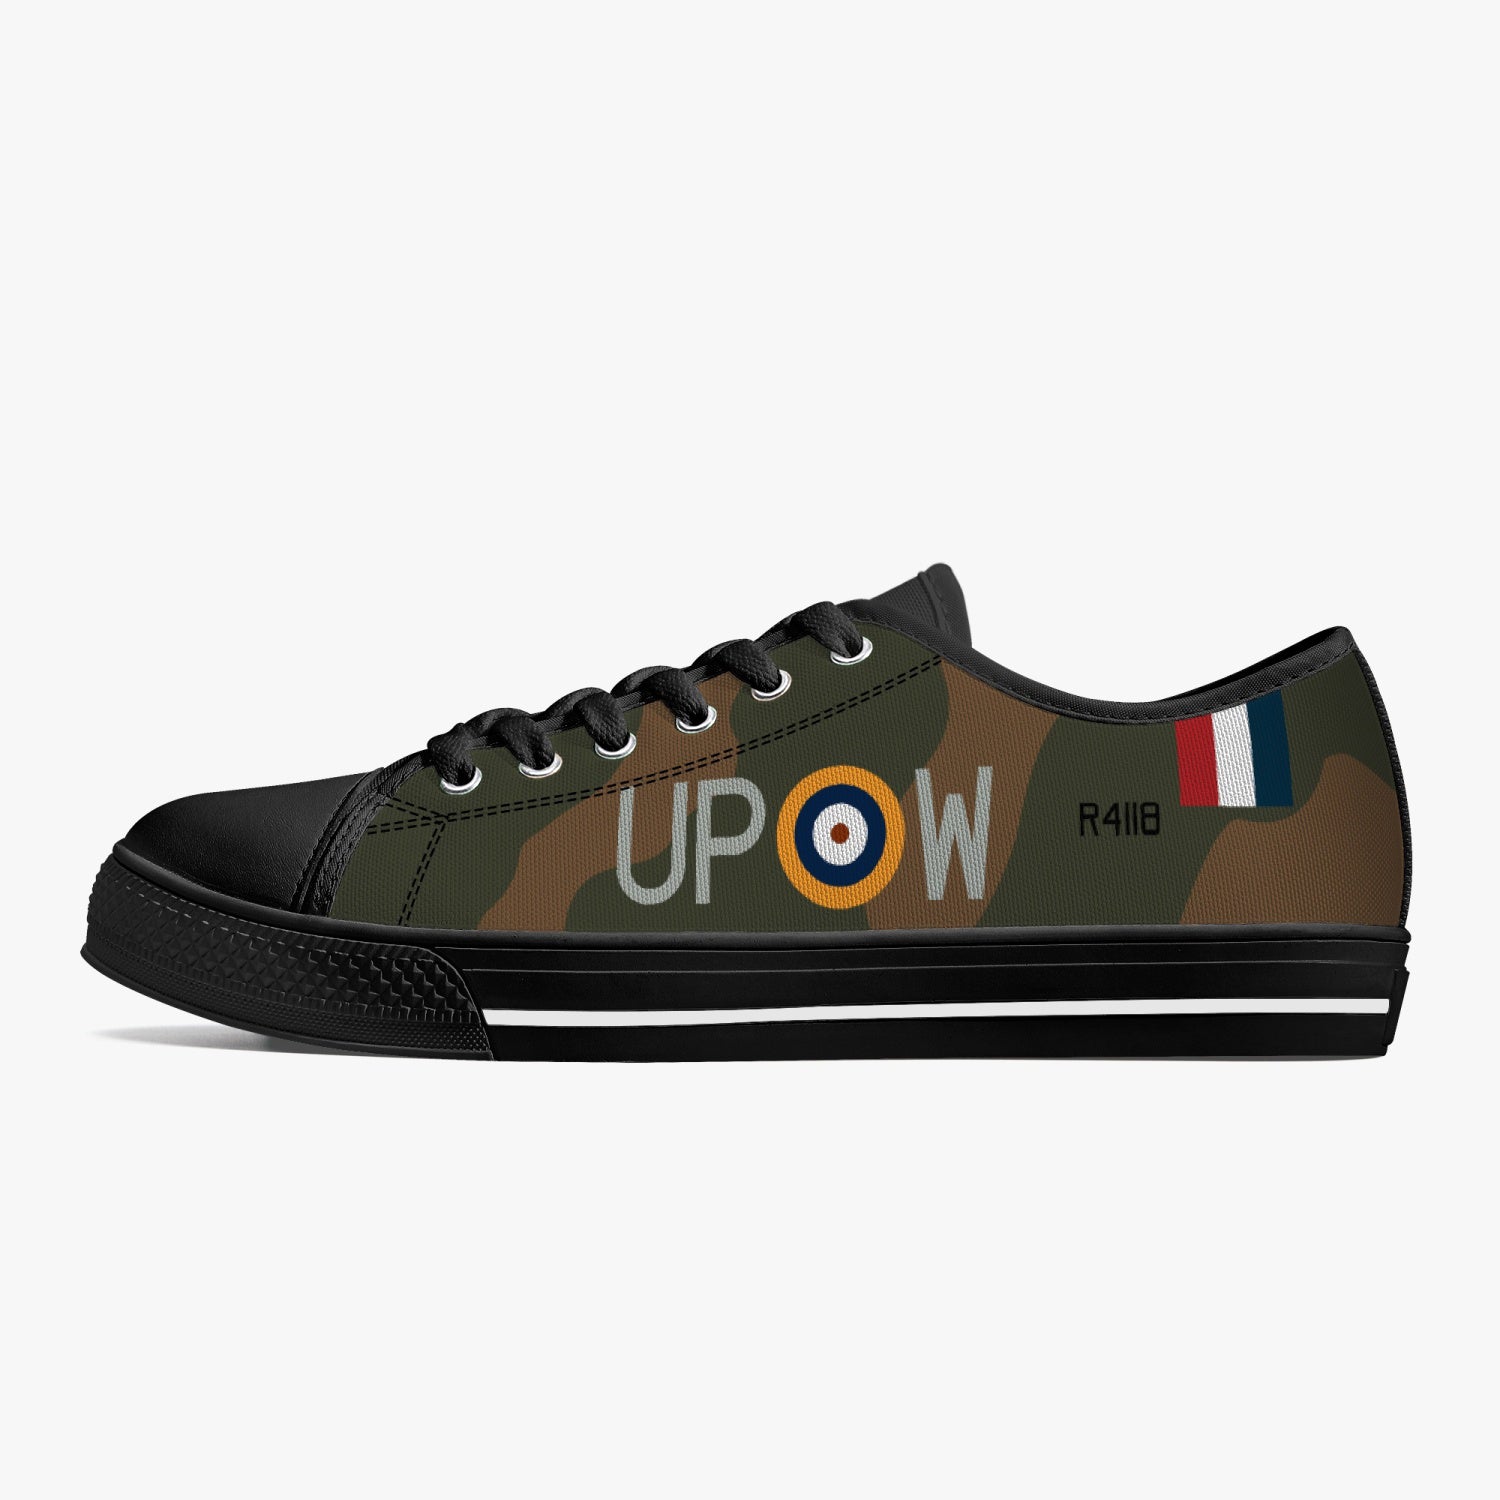 Hurricane "UP-W" Low Top Canvas Shoes